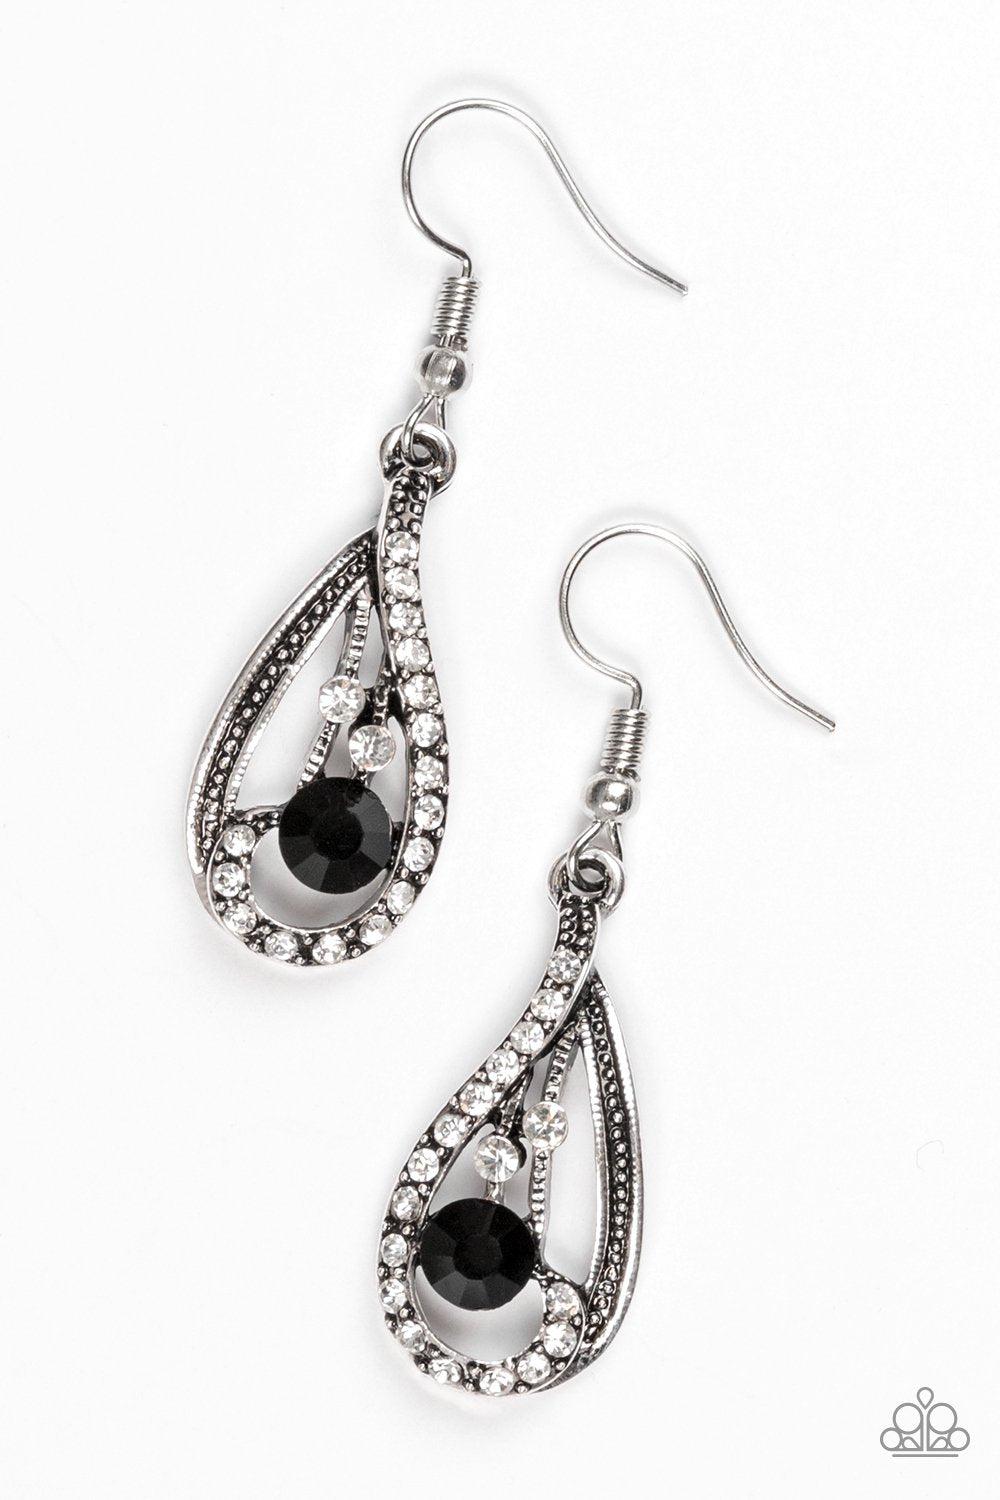 All For Show Black and White Rhinestone Earrings - Paparazzi Accessories-CarasShop.com - $5 Jewelry by Cara Jewels